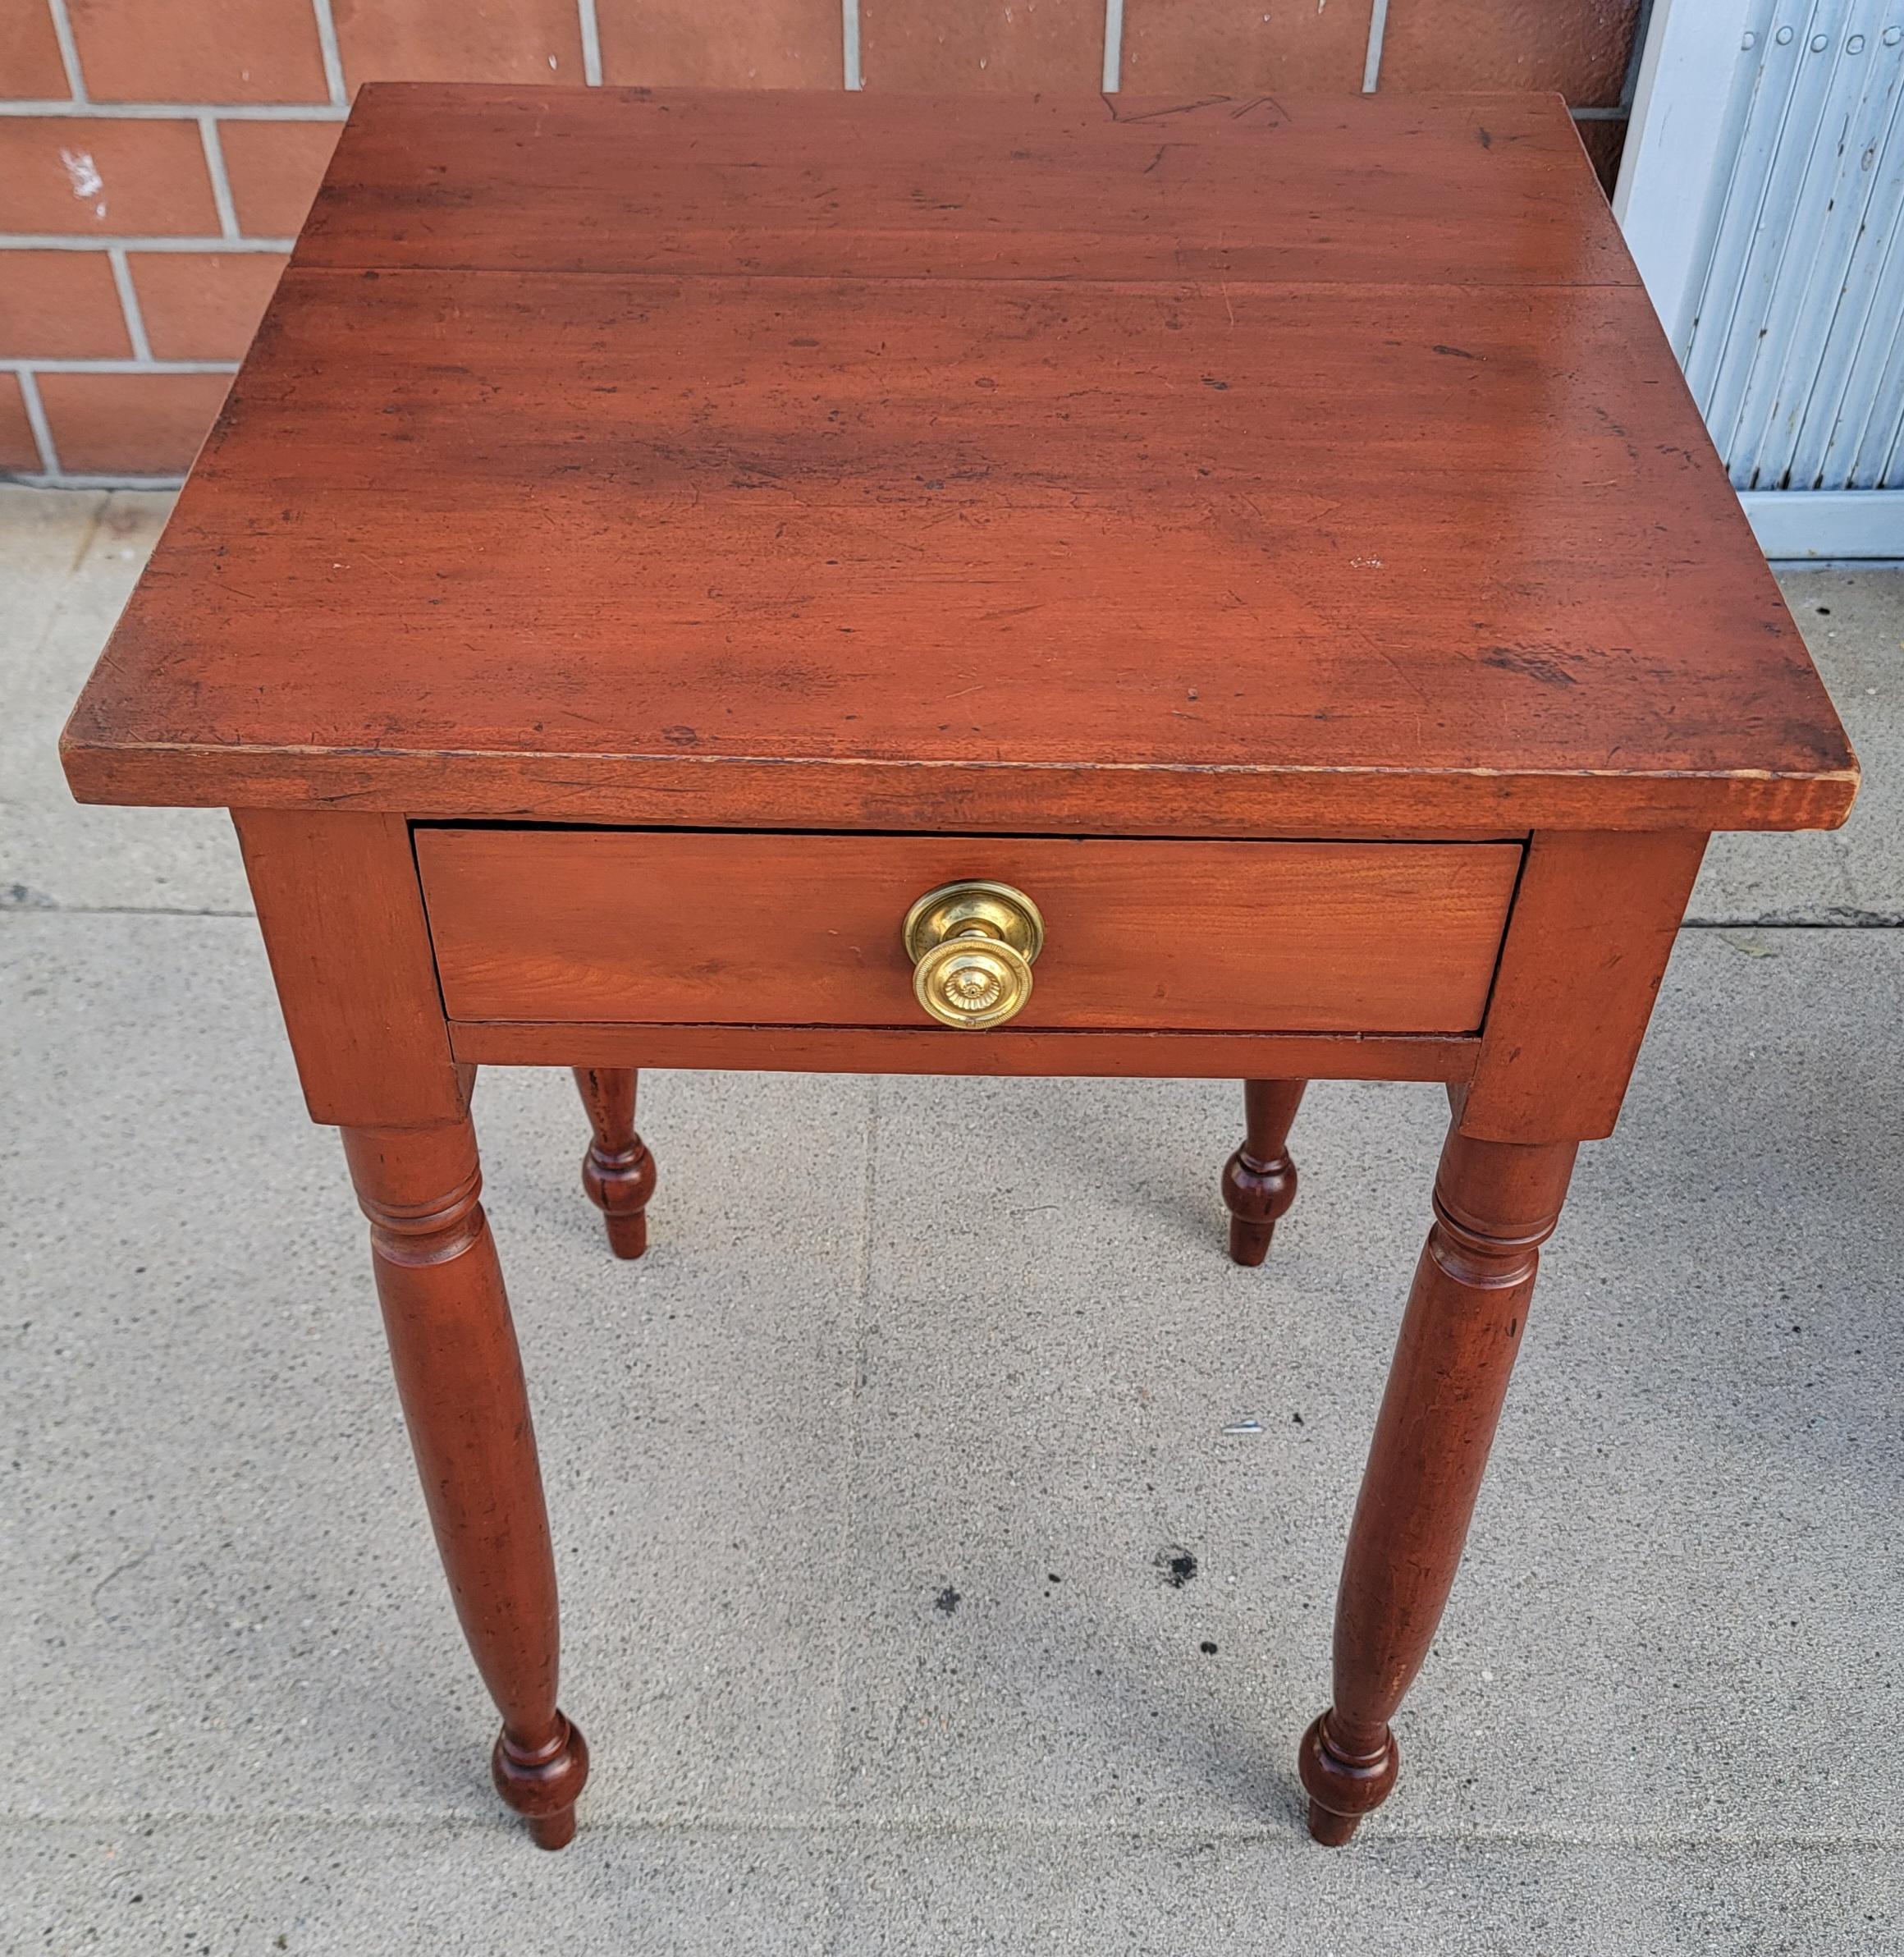 19Thc Cherry side table or night stand from Pennsylvania.The fine one drawer table is in pristine condition and has the original brass drawer pull.